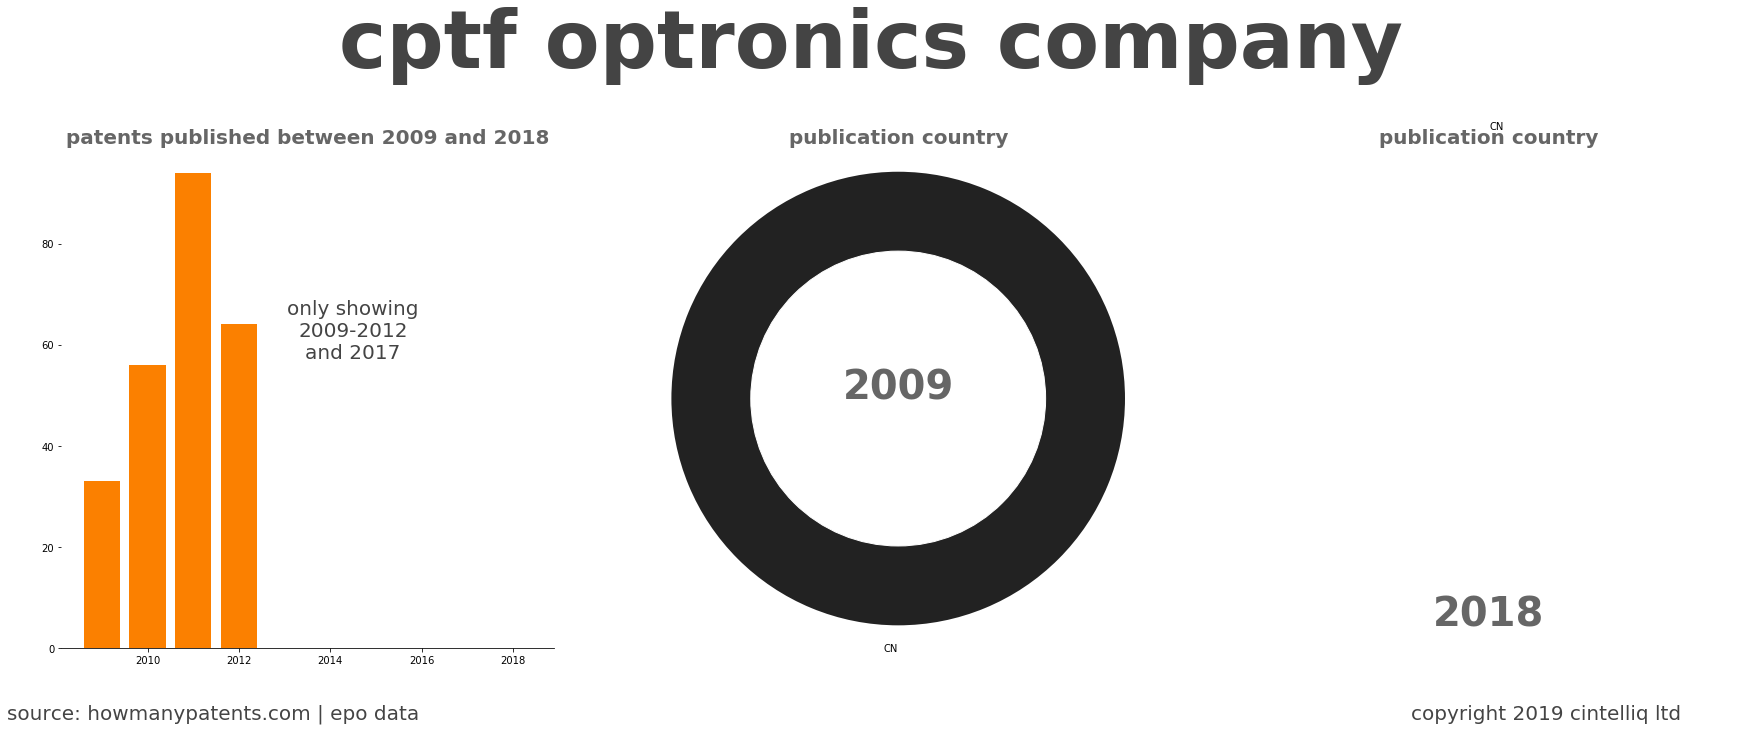 summary of patents for Cptf Optronics Company